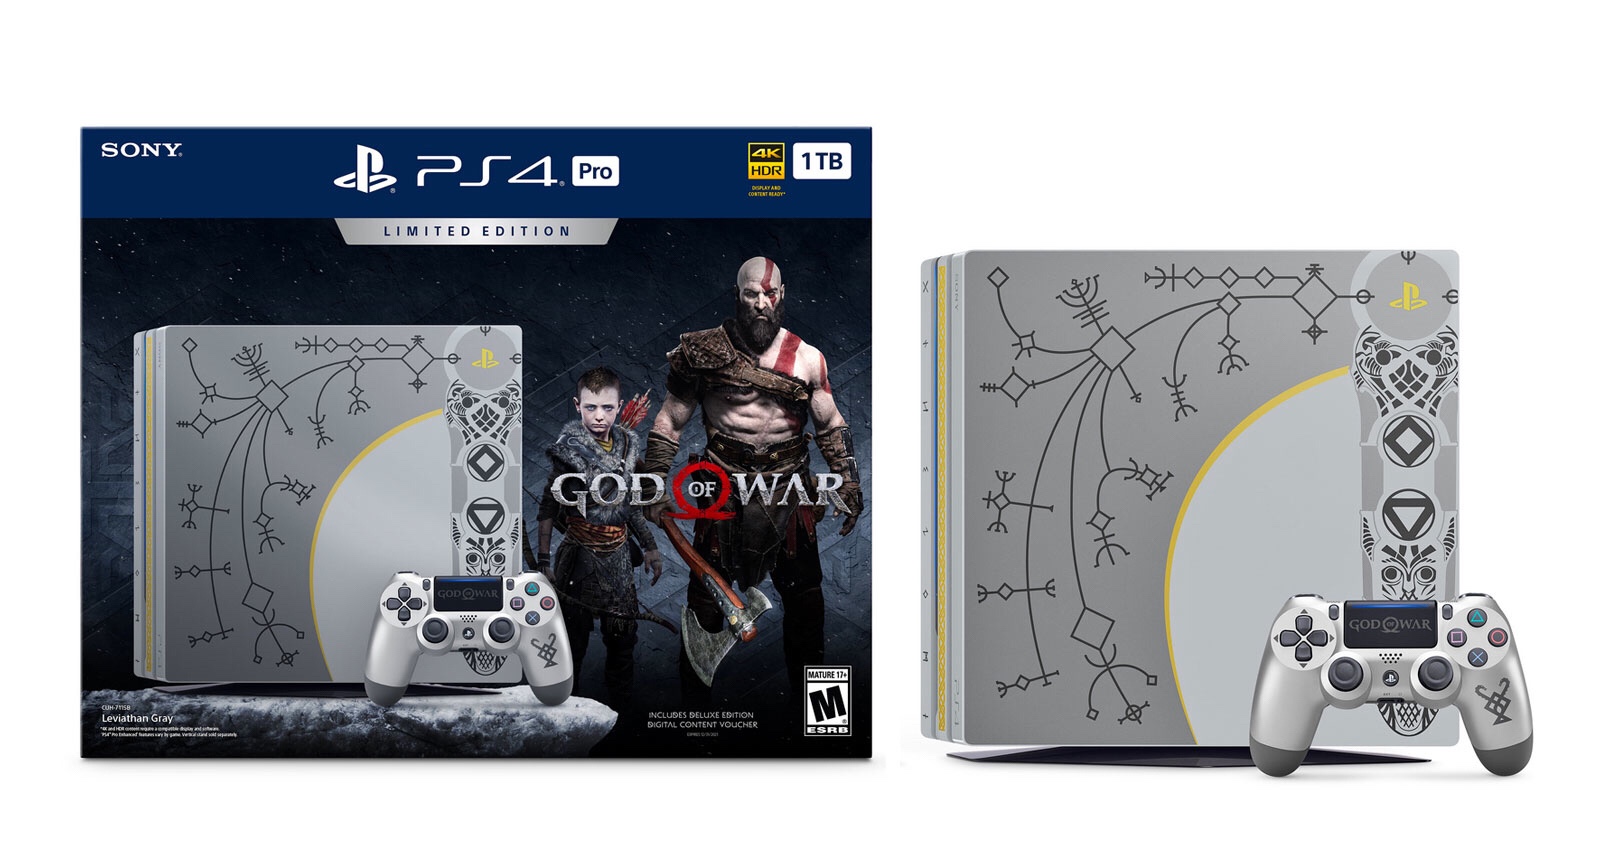 Sony is offering limited edition ‘God of War’ PS4 Pro bundle